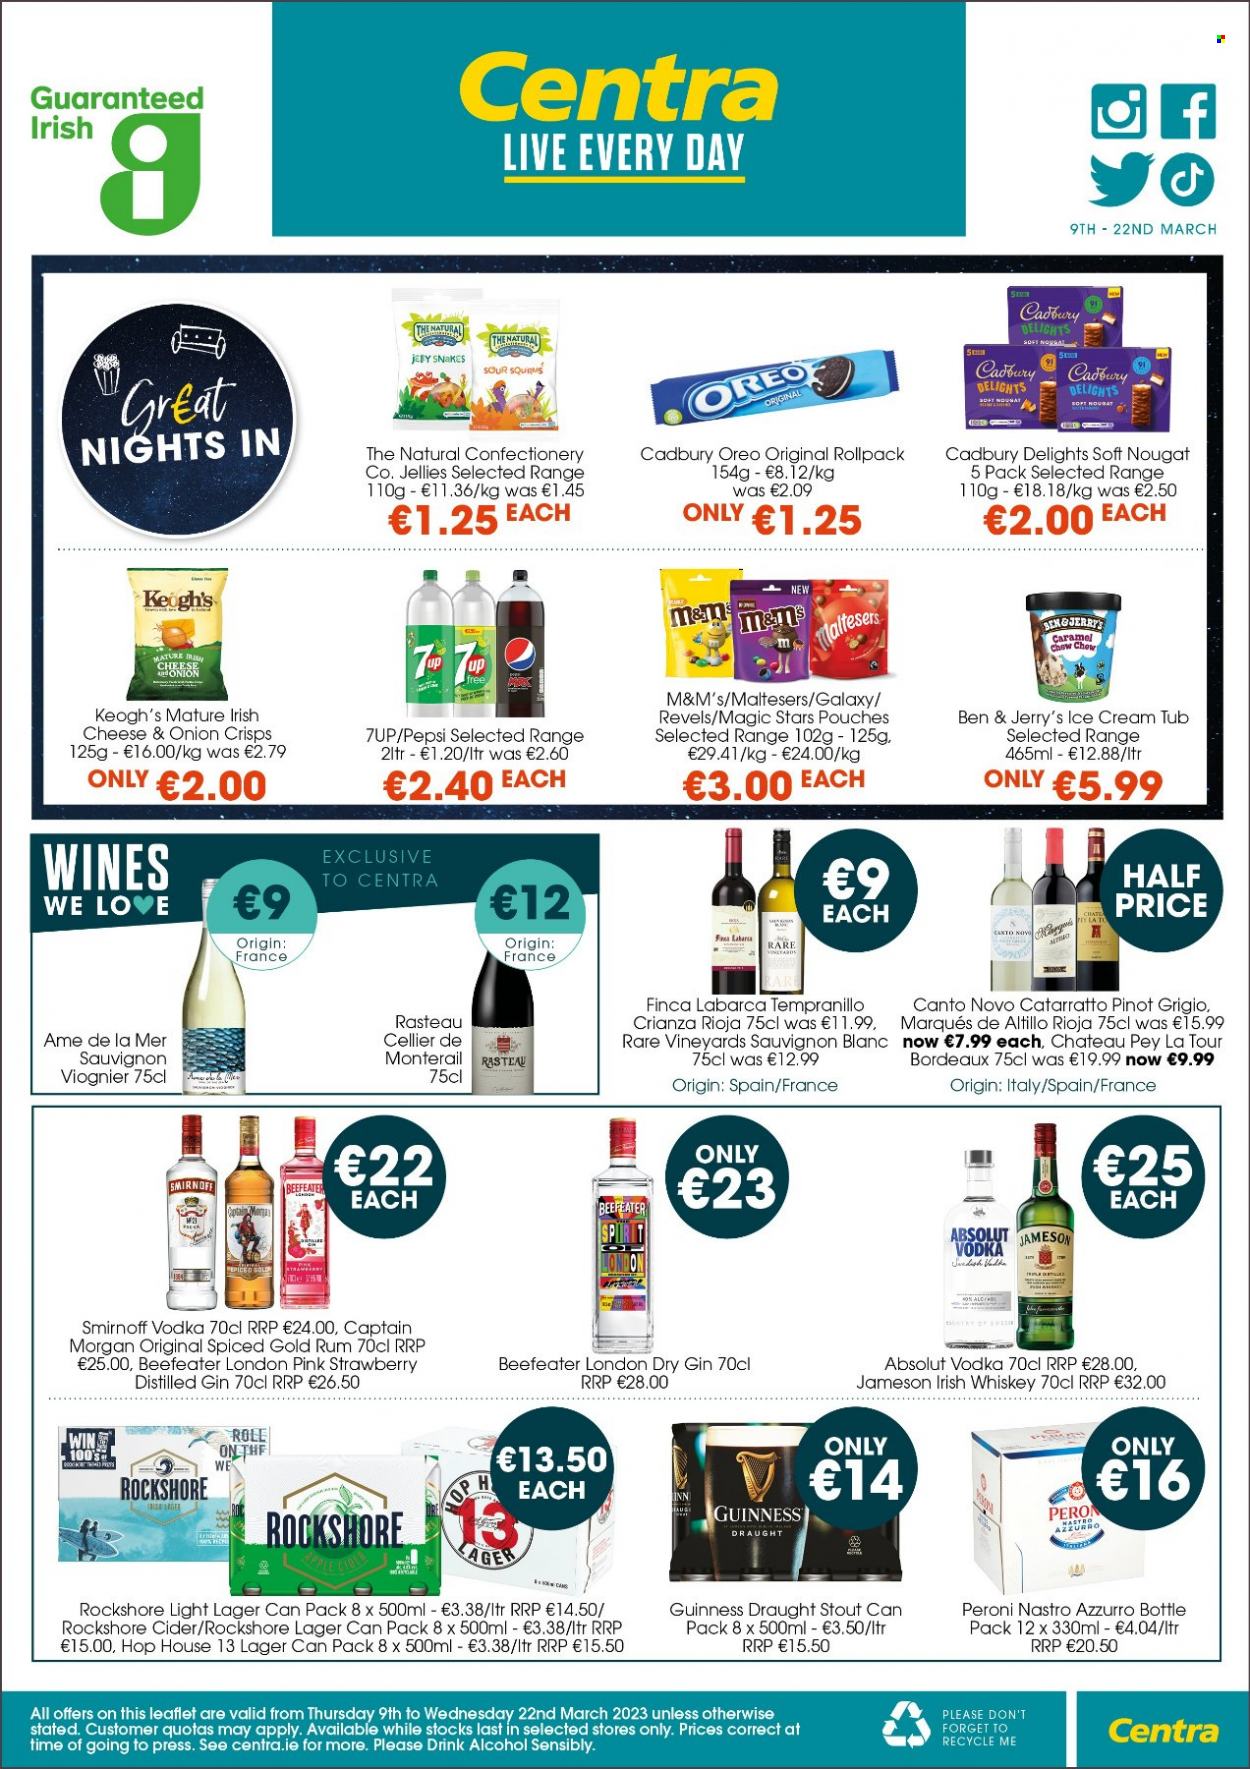 thumbnail - Centra offer  - 09.03.2023 - 22.03.2023 - Sales products - Oreo, ice cream, Ben & Jerry's, M&M's, nougat, Maltesers, Cadbury, Pepsi, 7UP, red wine, white wine, wine, Finca Labarca, alcohol, Tempranillo, Pinot Grigio, Sauvignon Blanc, Captain Morgan, gin, rum, Smirnoff, vodka, whiskey, irish whiskey, Jameson, Absolut, Beefeater, whisky, cider, beer, Guinness, Peroni, Lager, Rockshore. Page 4.